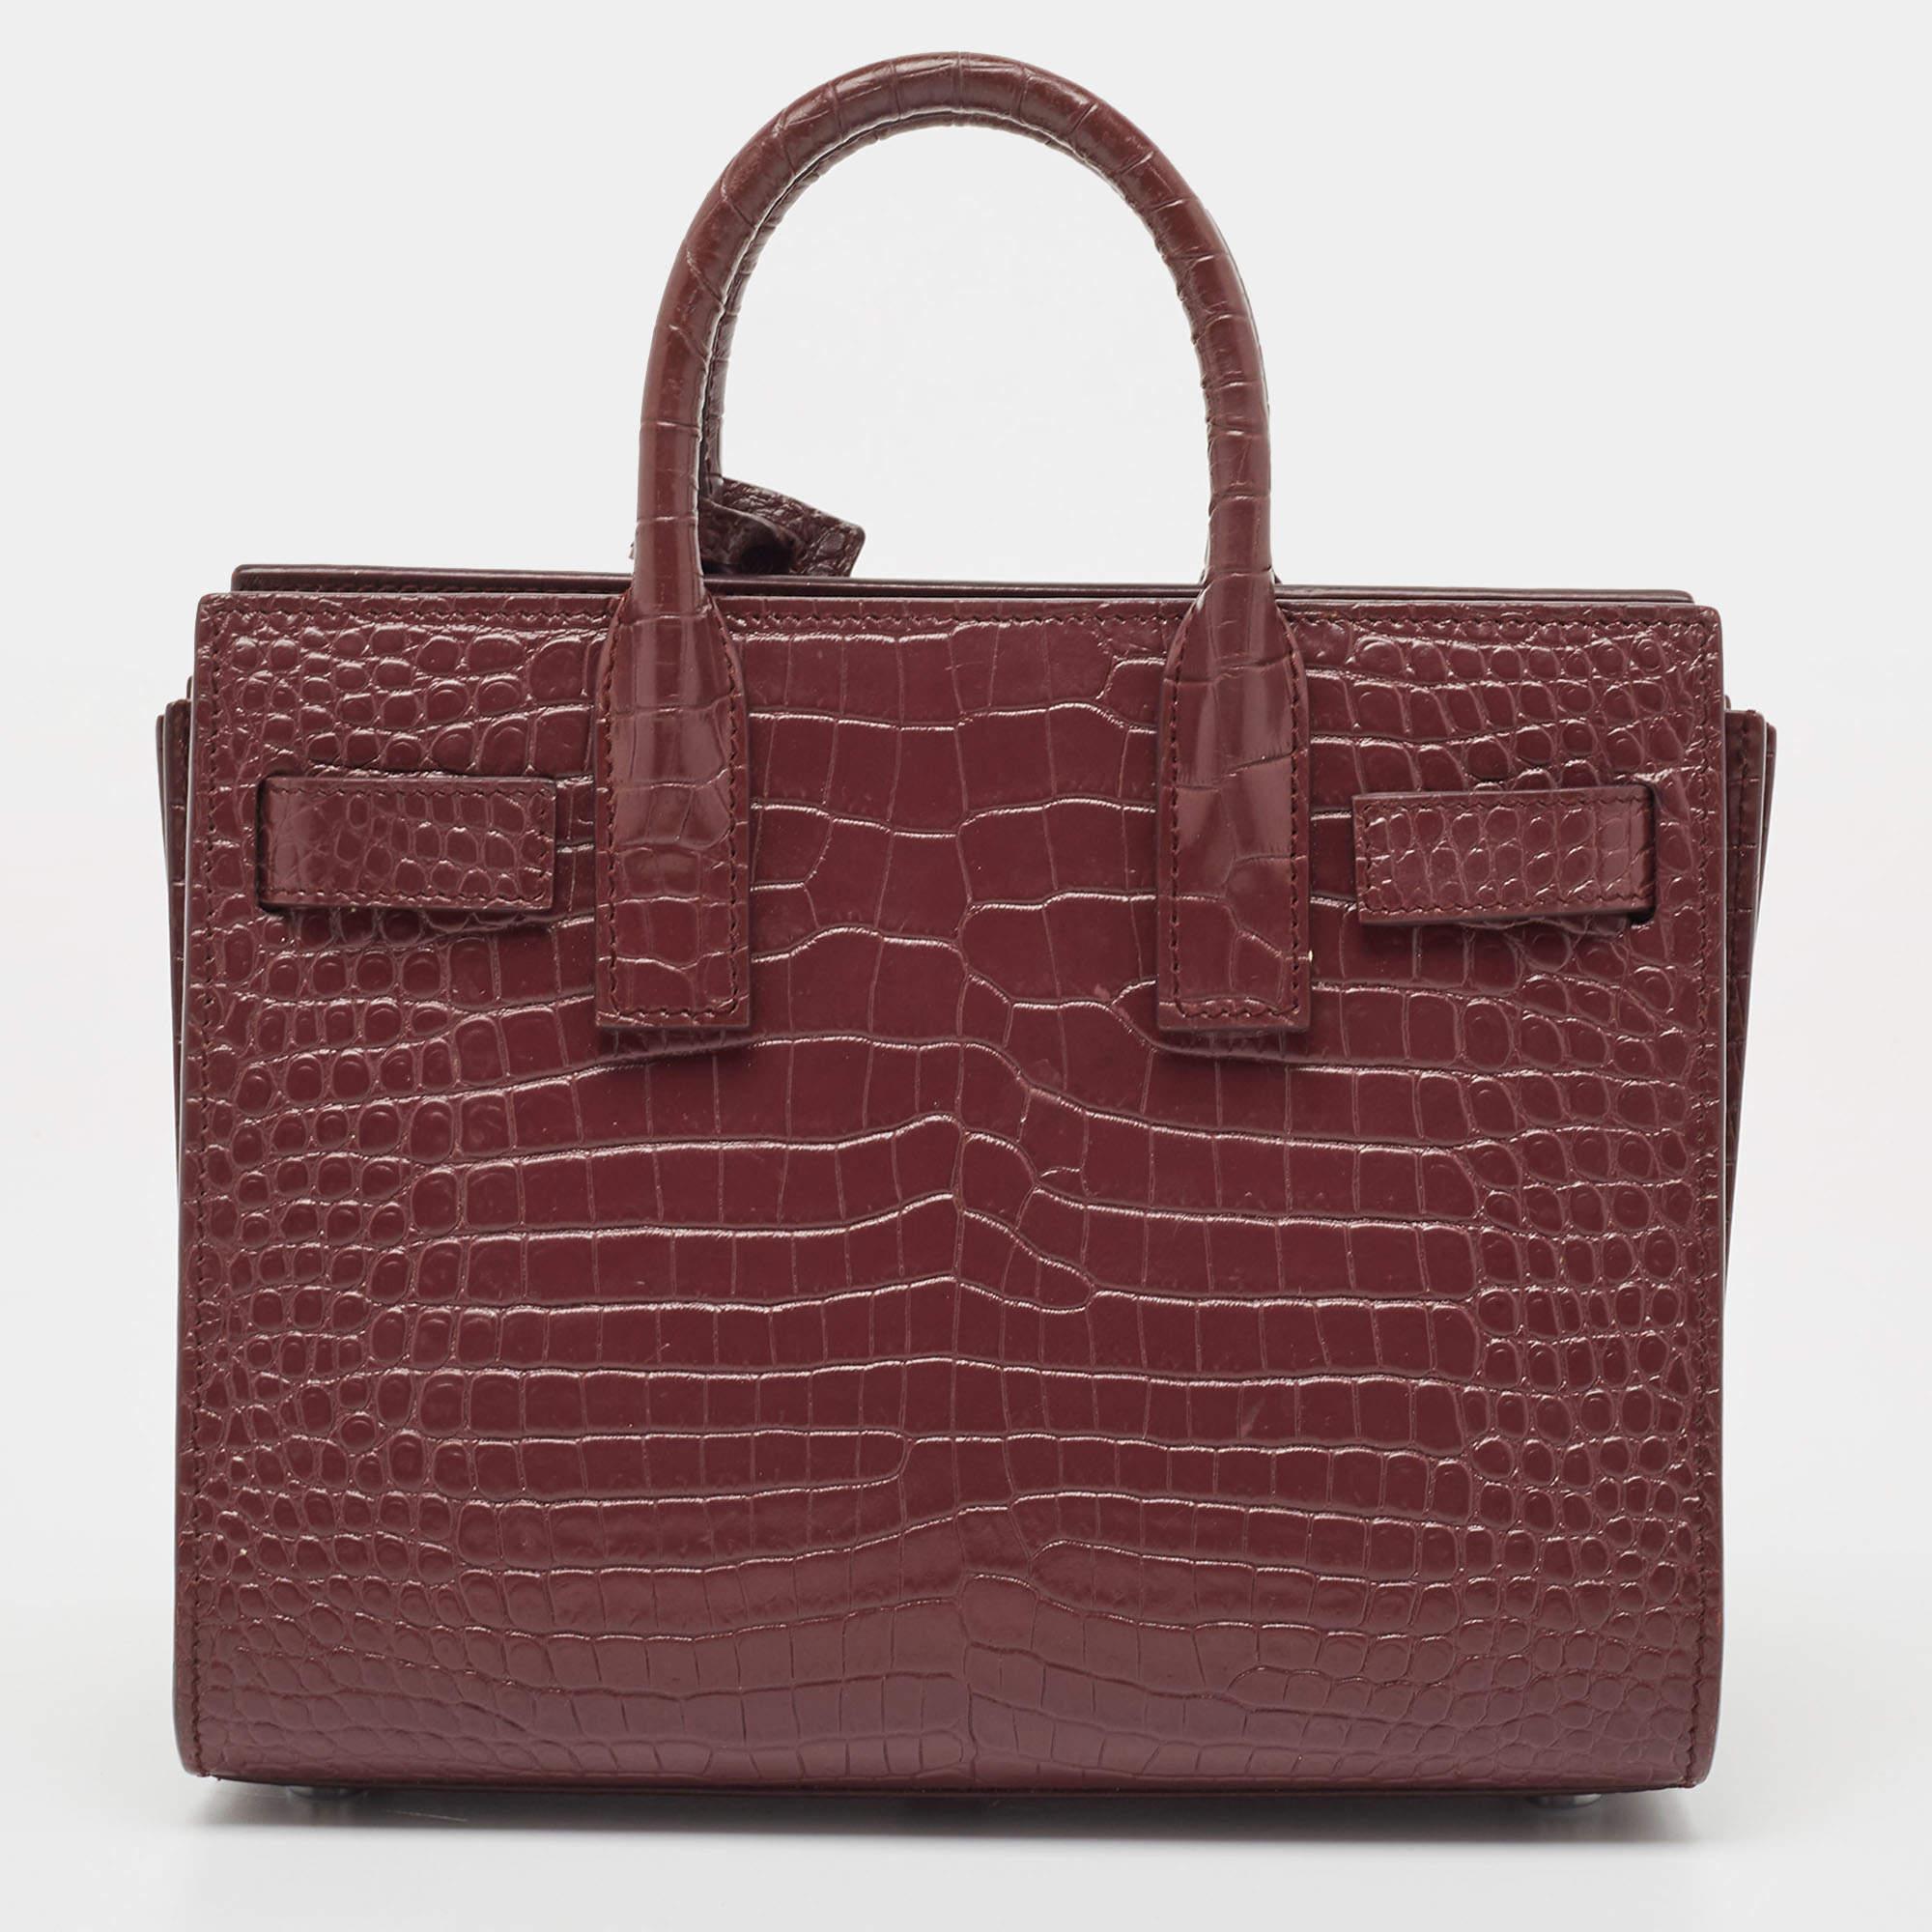 This Sac de Jour tote by Saint Laurent has a structure that exhibits a sophisticated image. Crafted from croc-embossed leather, the bag can be carried in a chic way by double top handles and a shoulder strap. The tote comes with a stylish interior